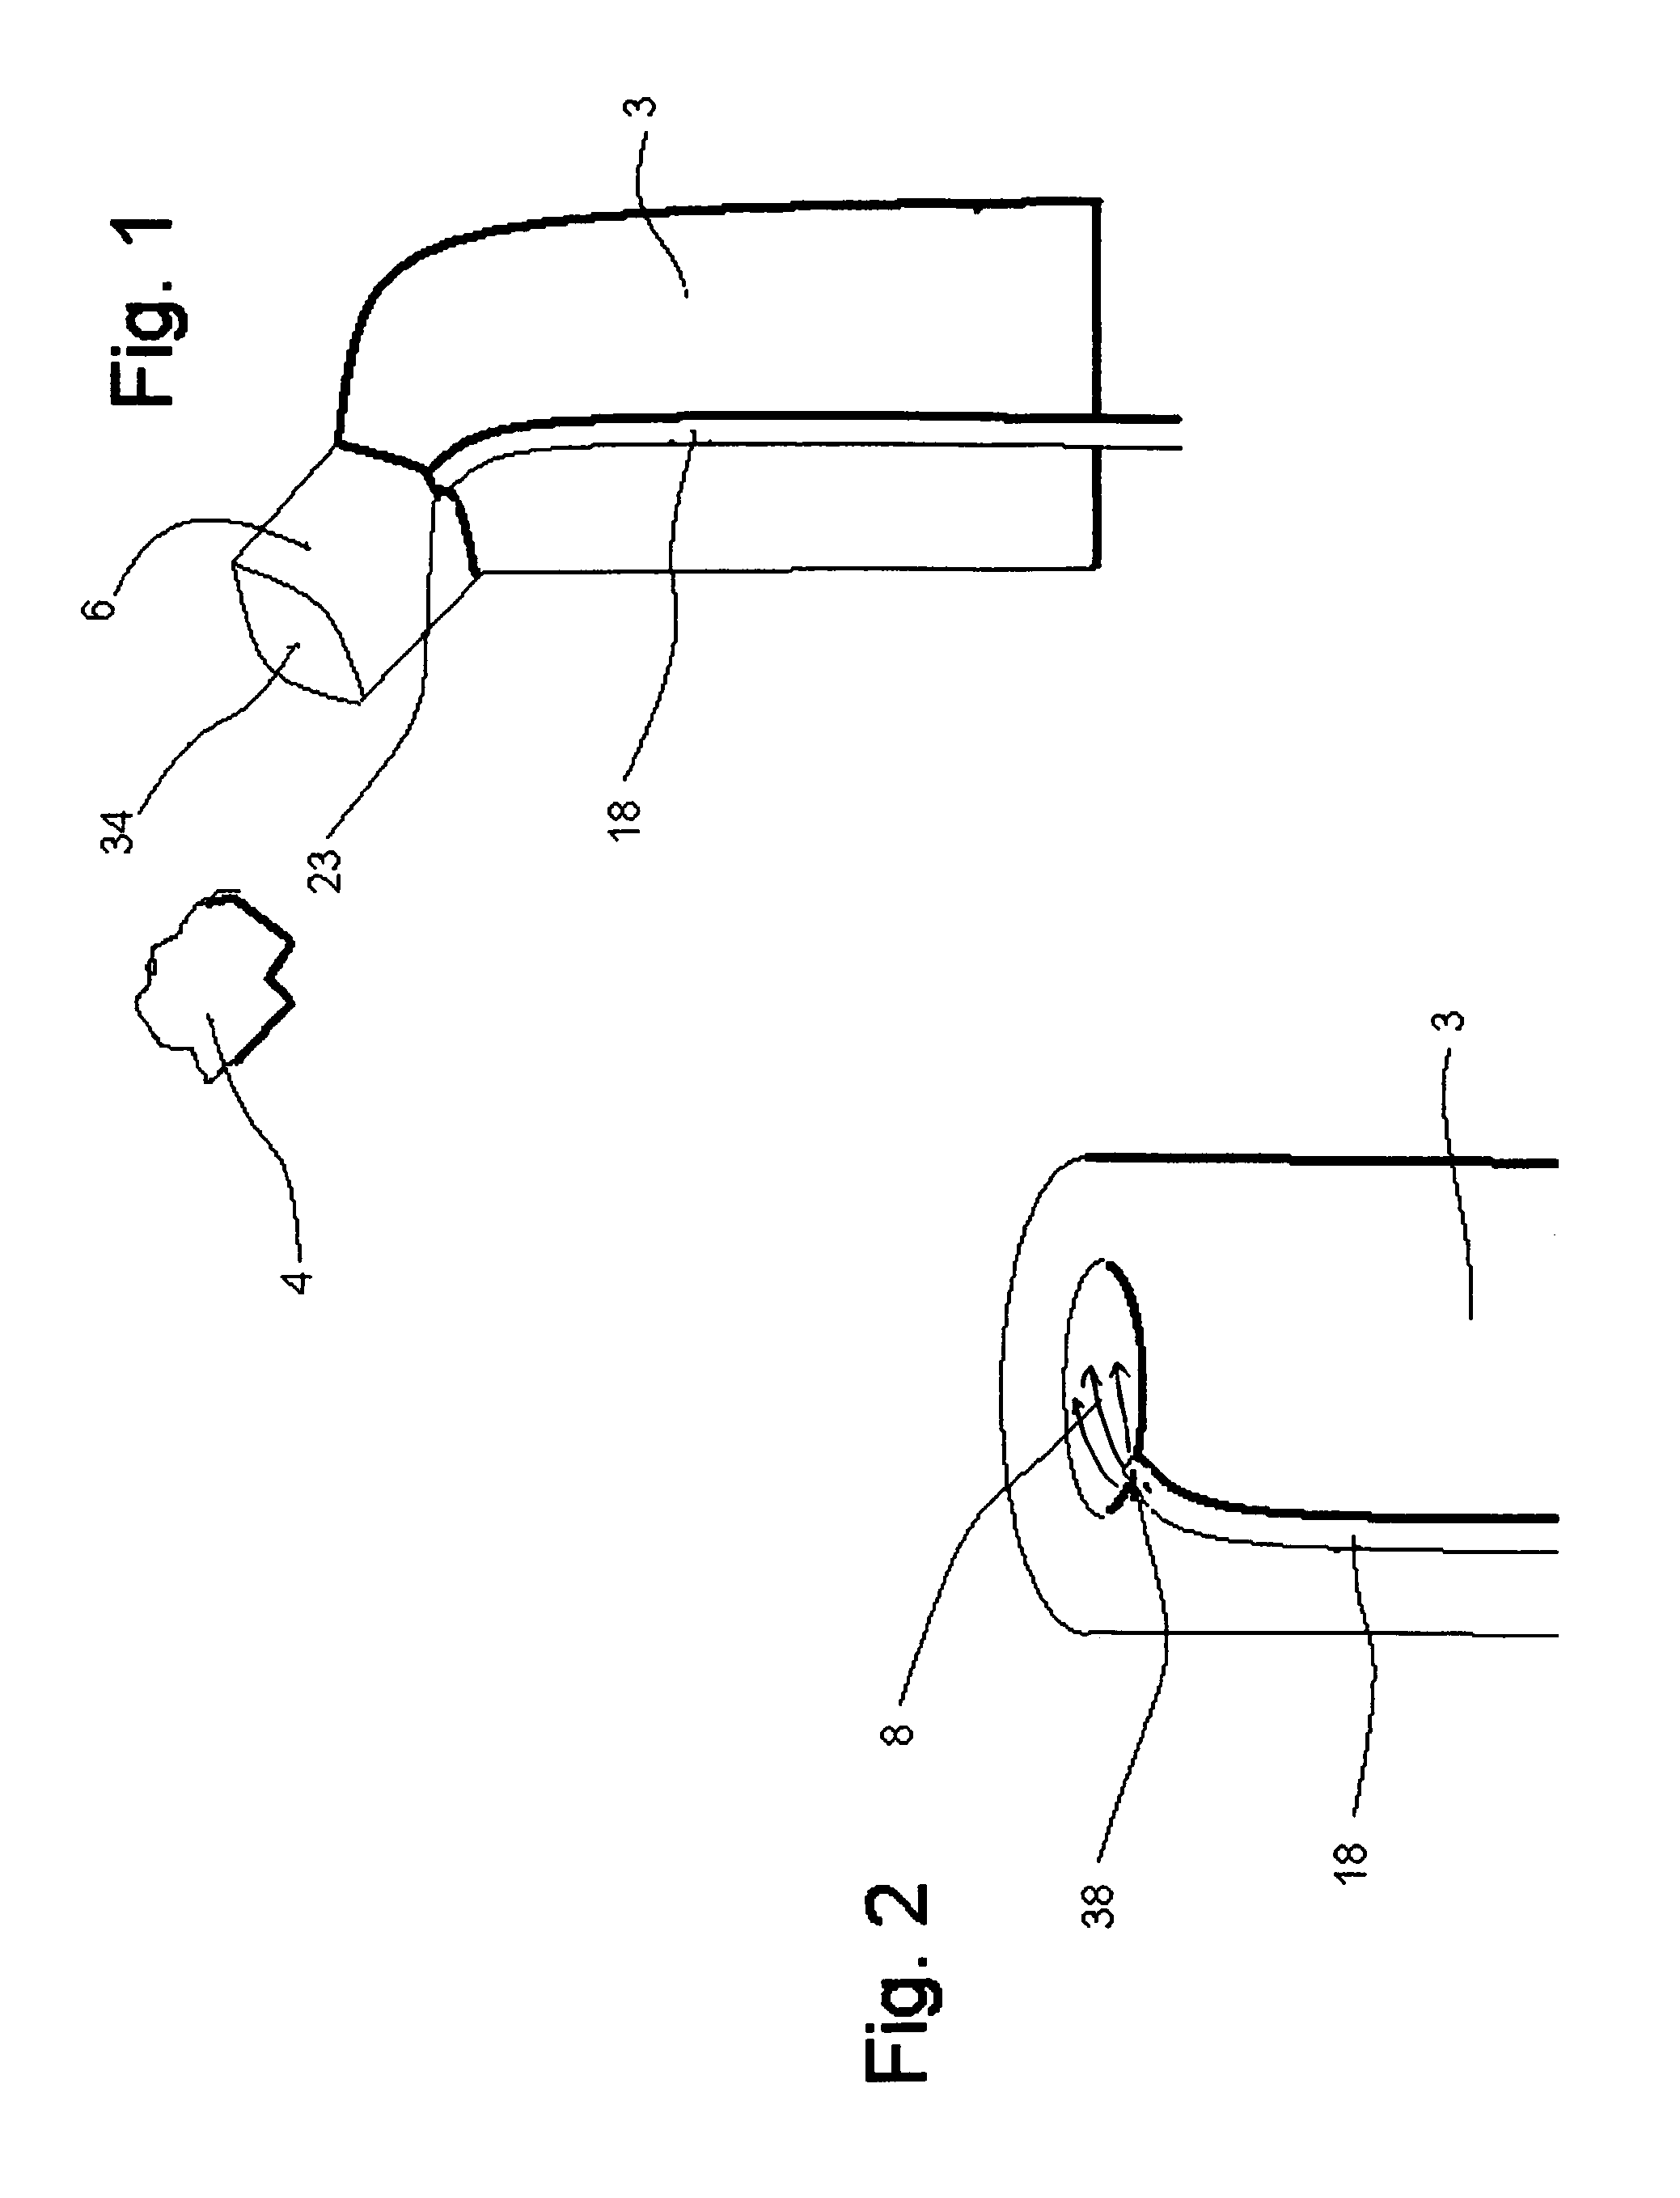 Means and method to prevent liquids and flying debris from blocking the viewing pathway of an optical element